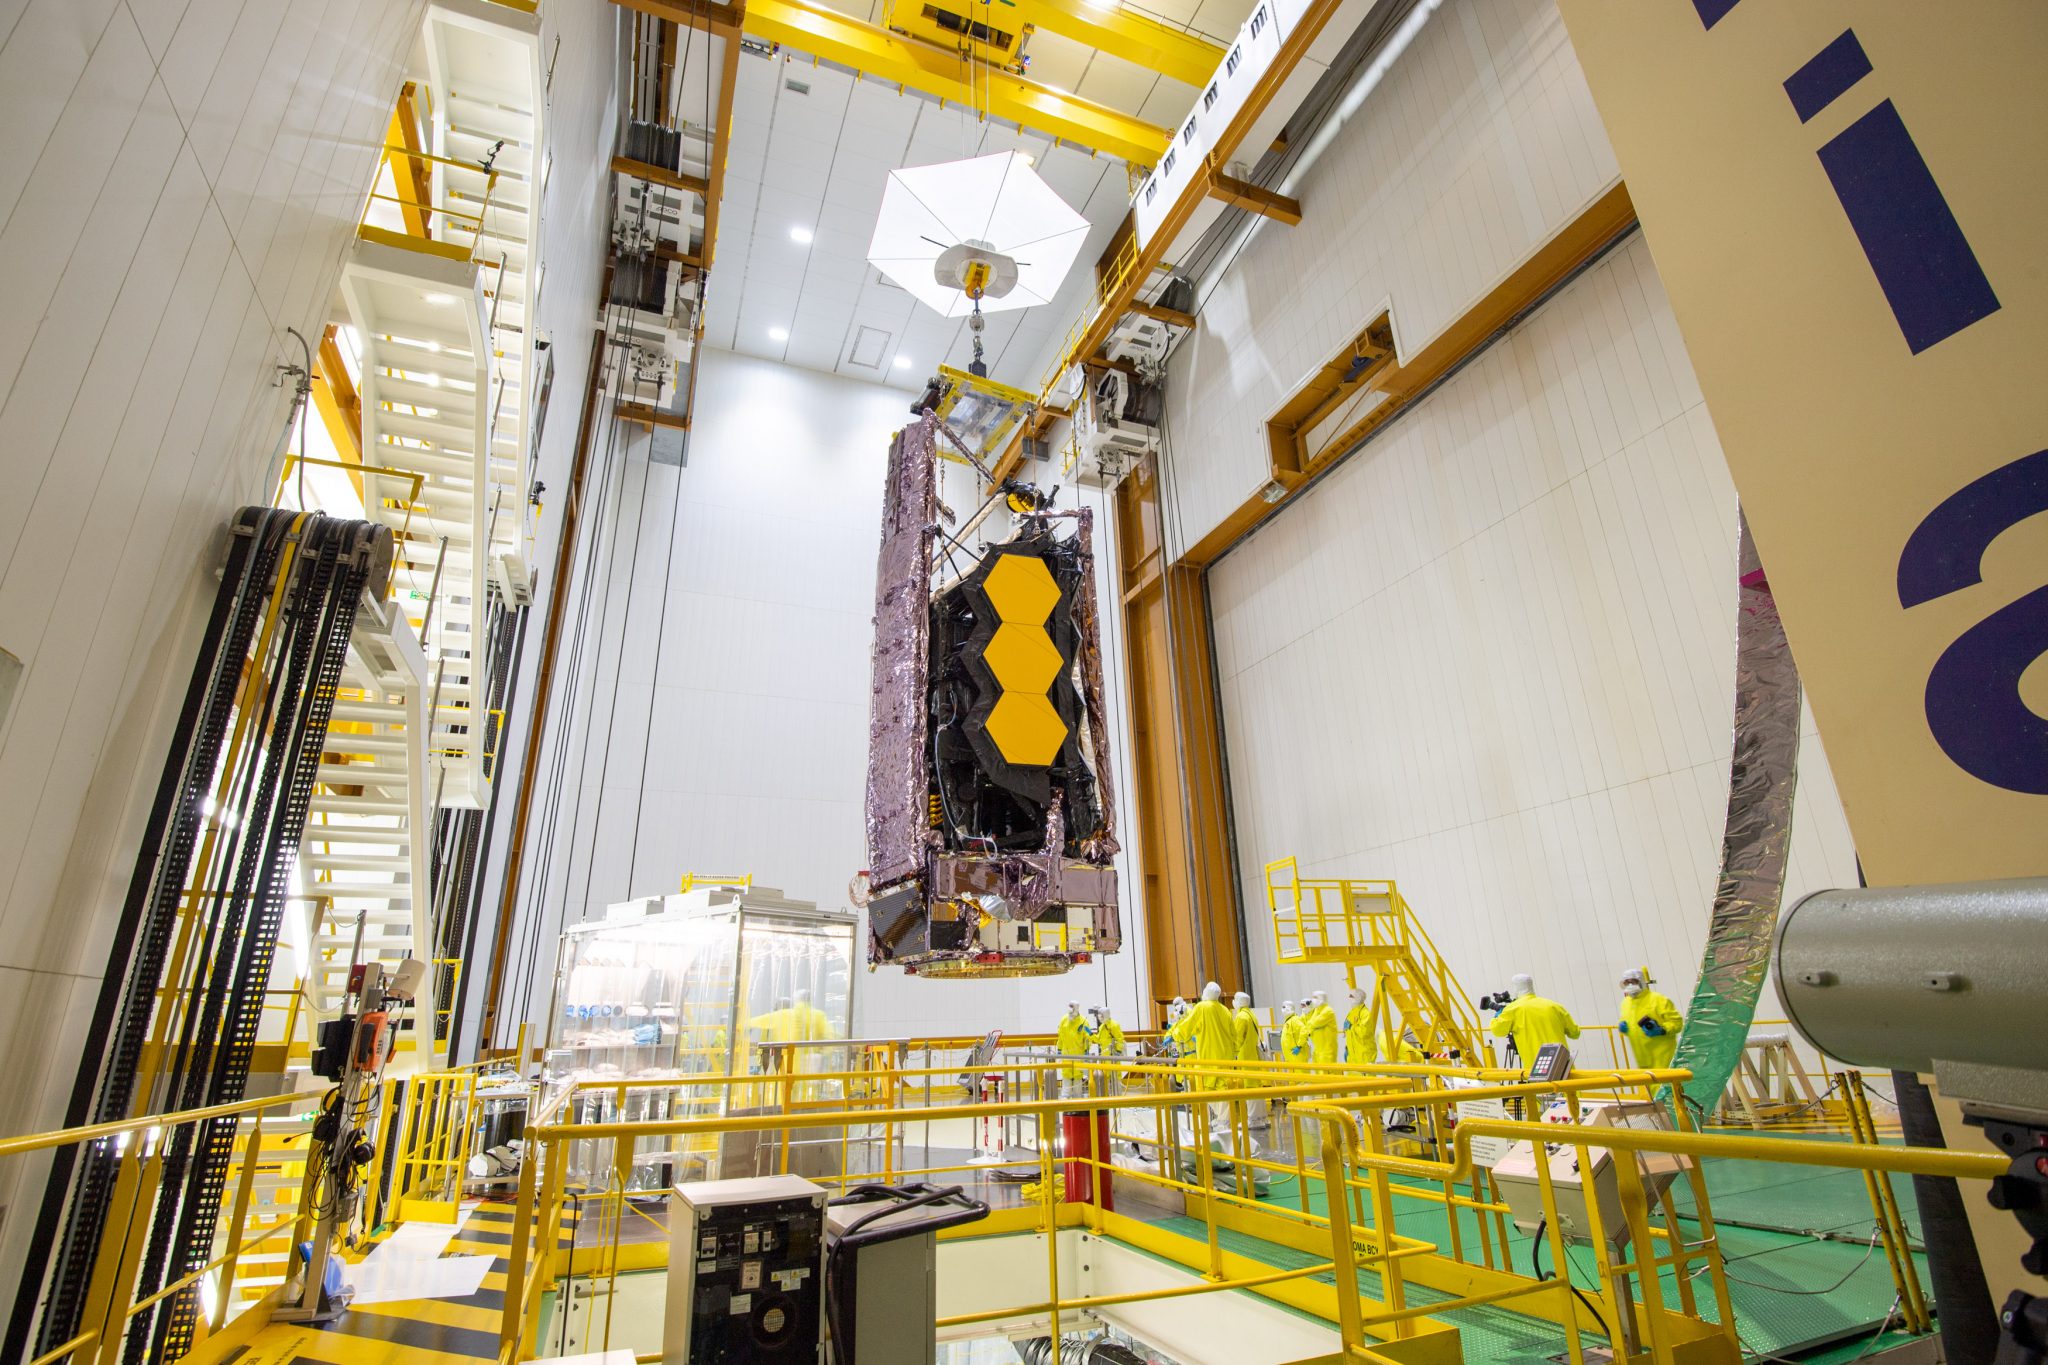 NASA Webb Telescope Mated and Encapsulated for Ariane 5 Launch Dec. 24 after Comm Glitch Resolved